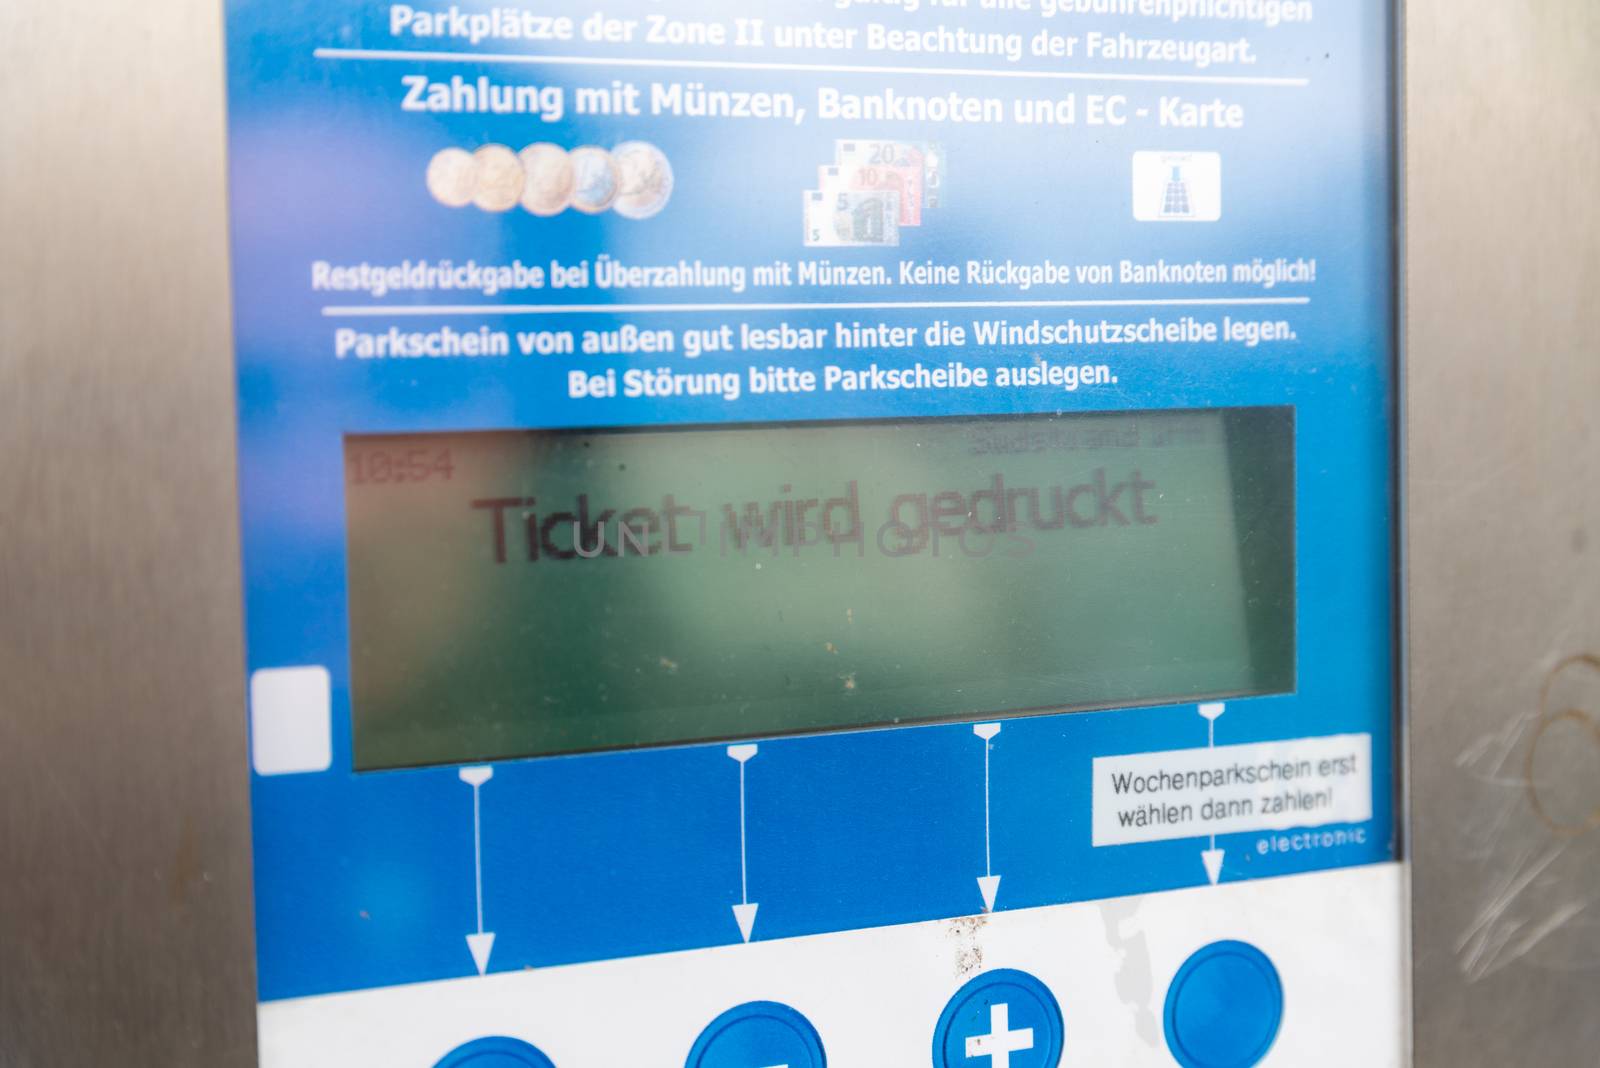 Display from a parking ticket machine by Guinness